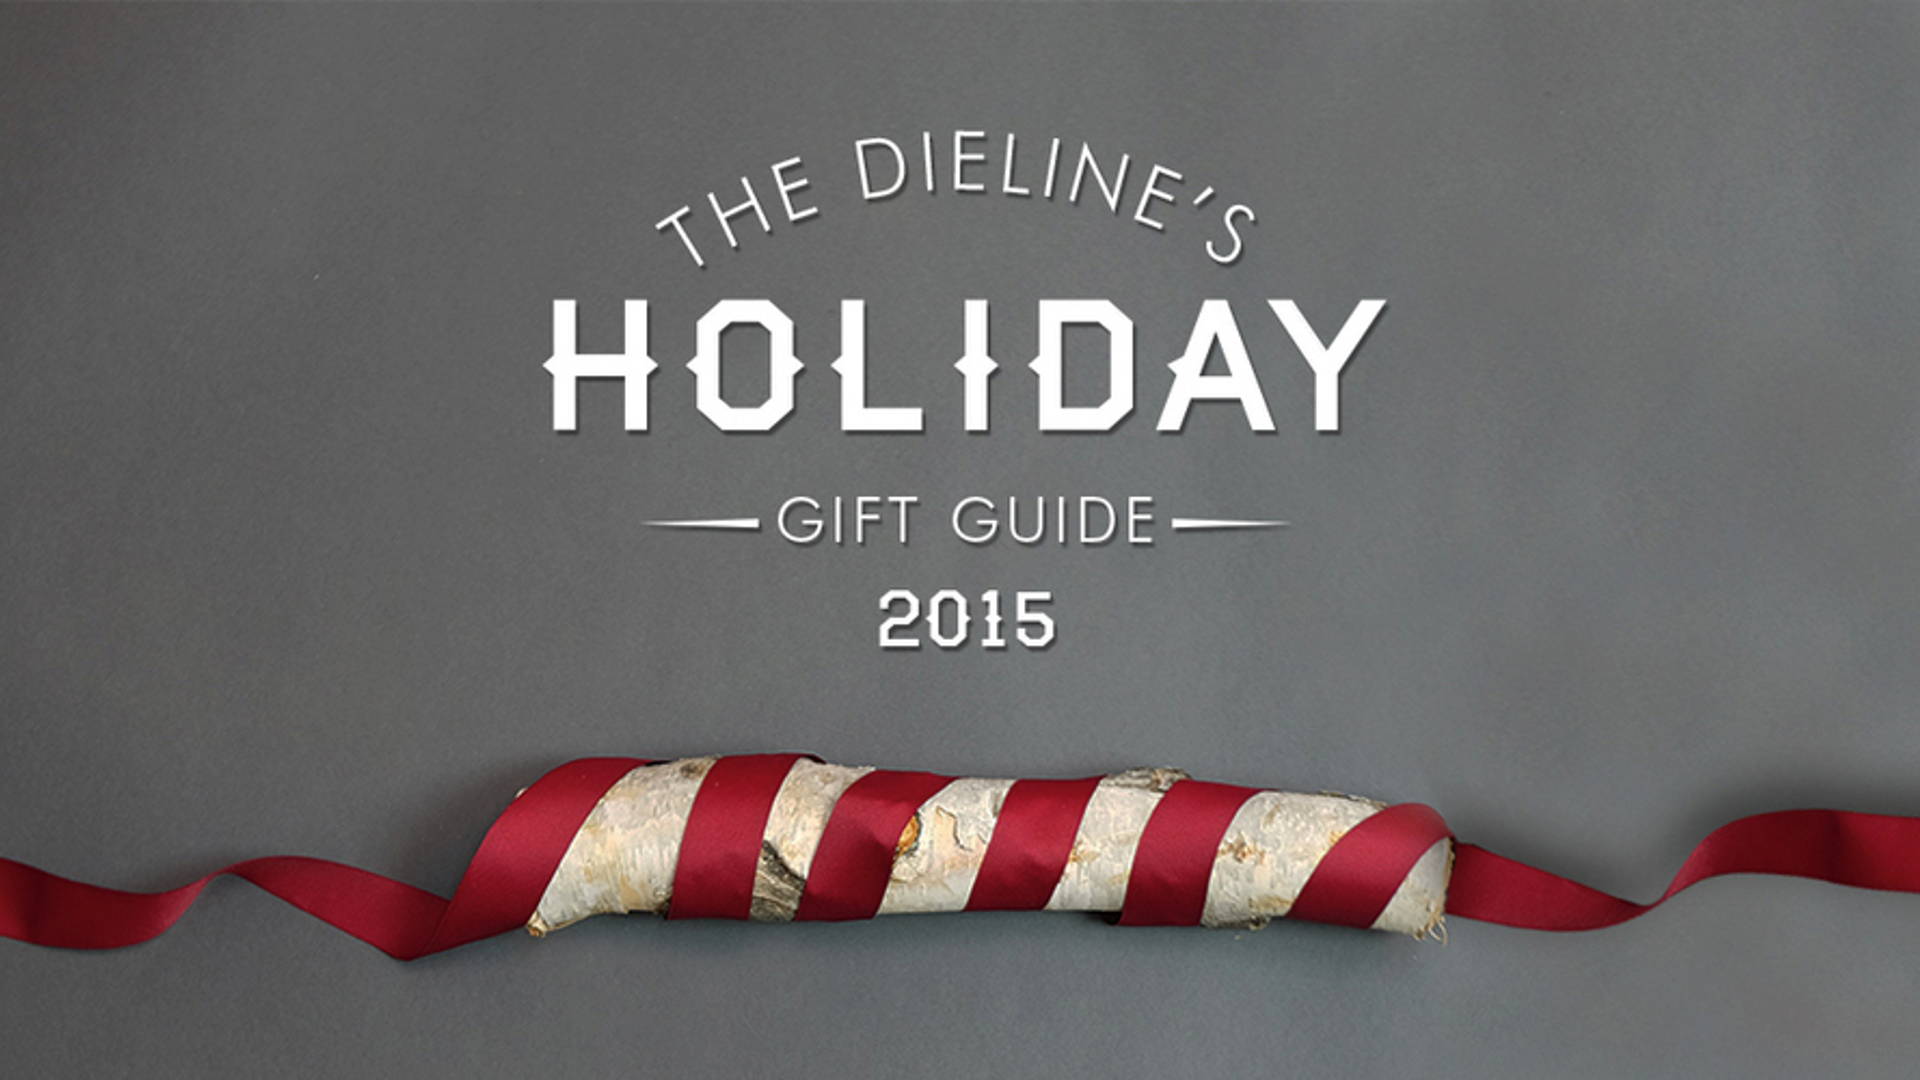 Featured image for The Dieline's Holiday Gift Guide 2015